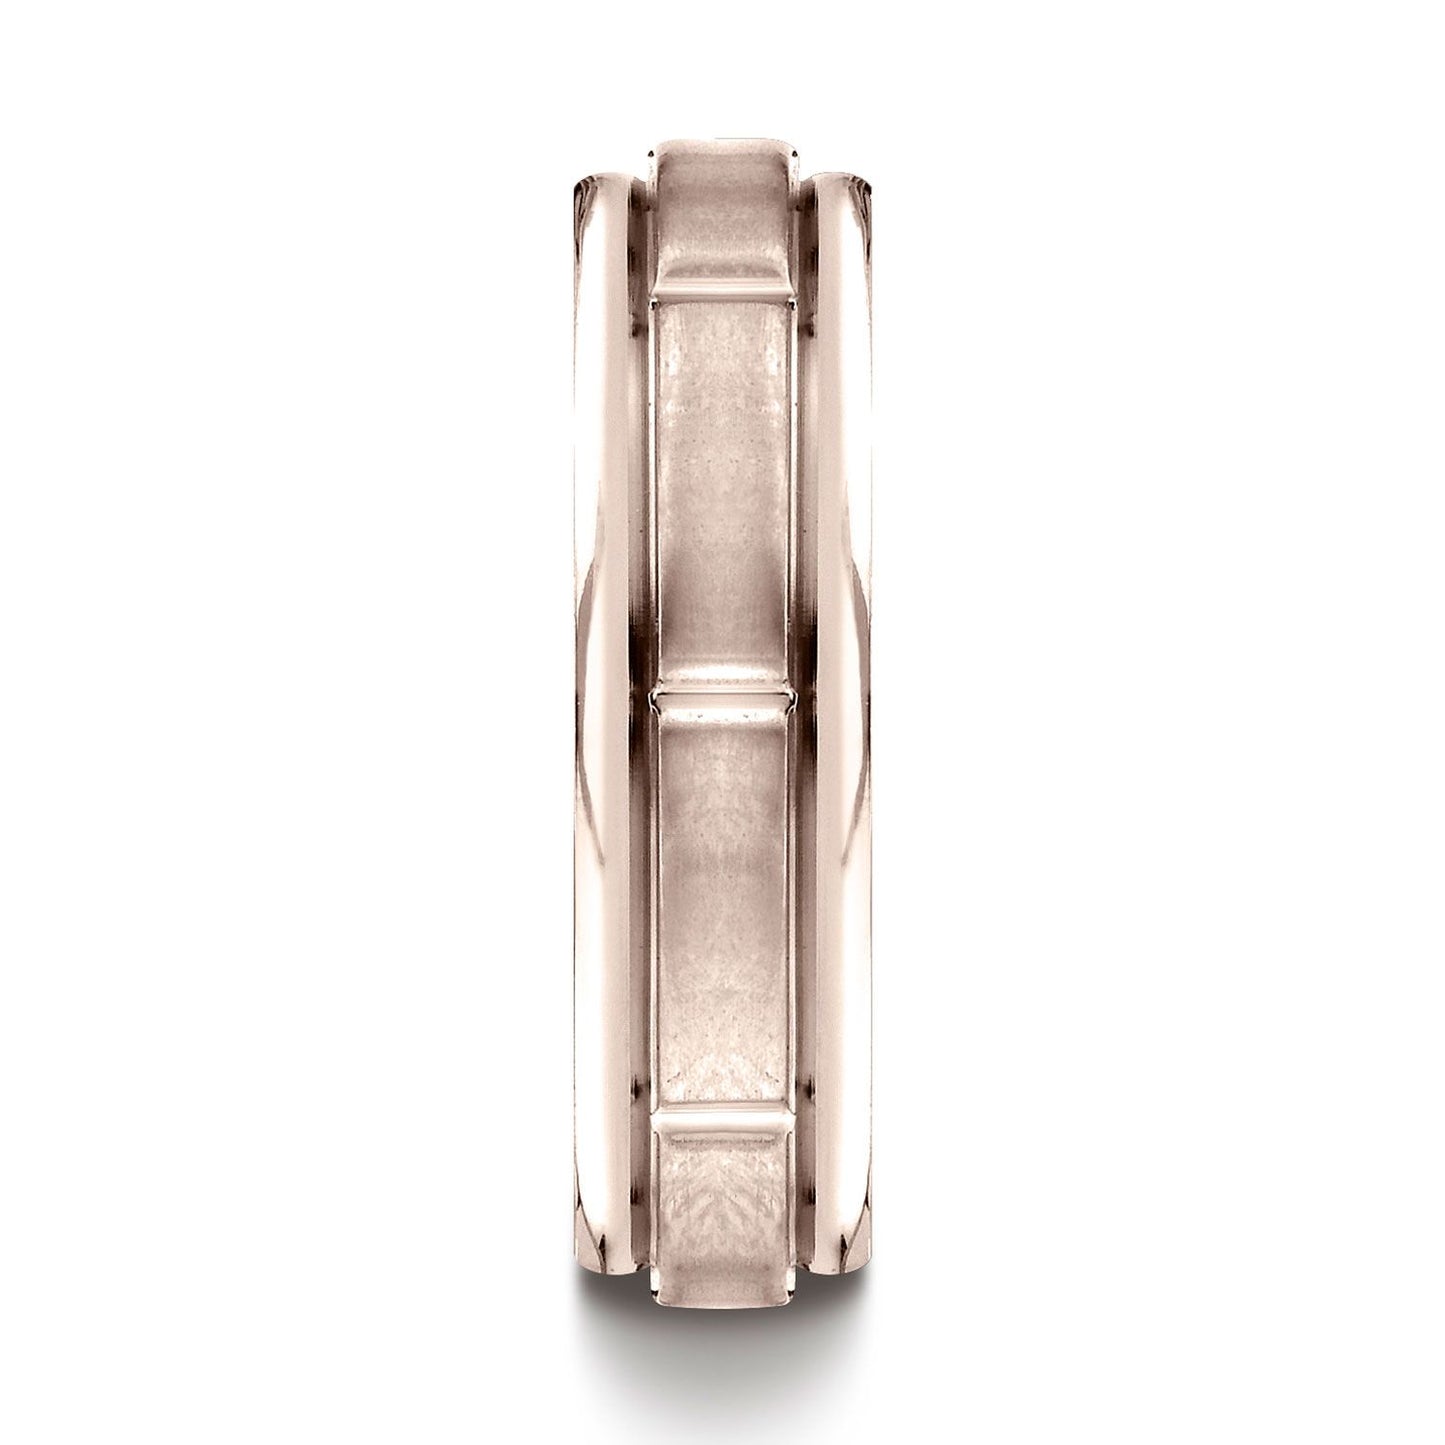 14k Rose Gold 6mm Comfort-fit Satin-finished 8 High Polished Center Cuts And Round Edge Carved Design Band